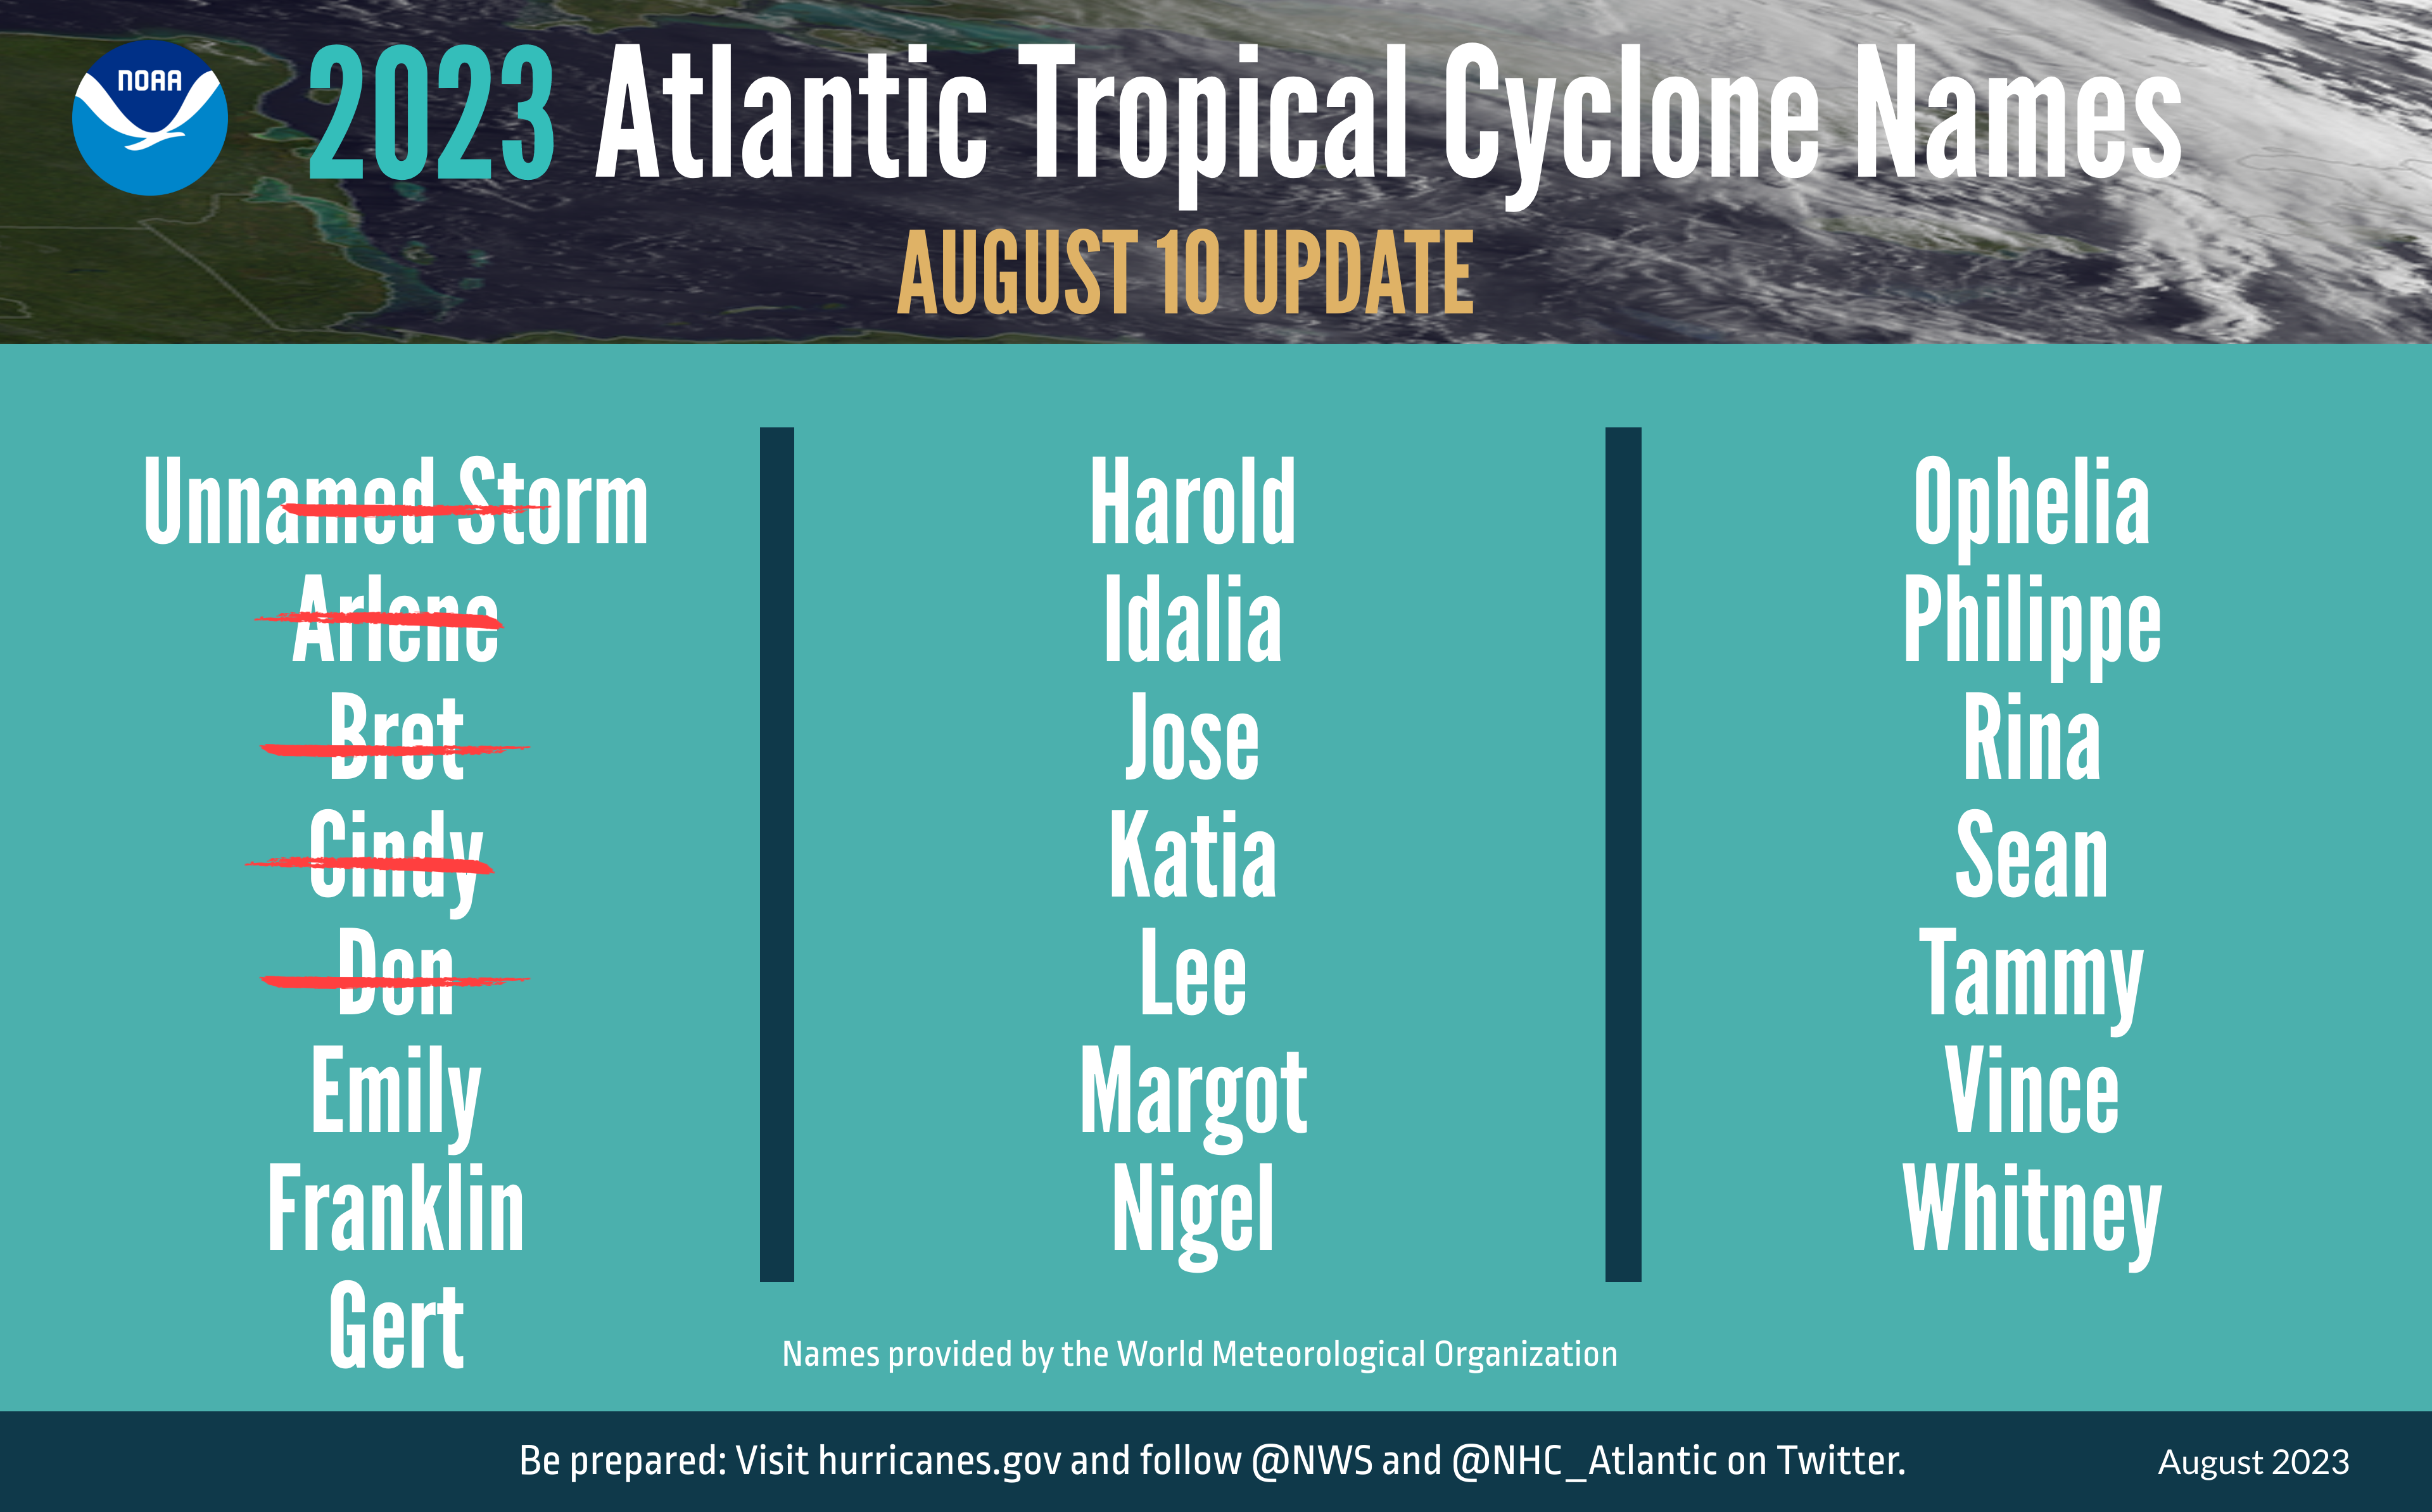 The 2023 Atlantic tropical cyclone names selected by the World Meteorological Organization.